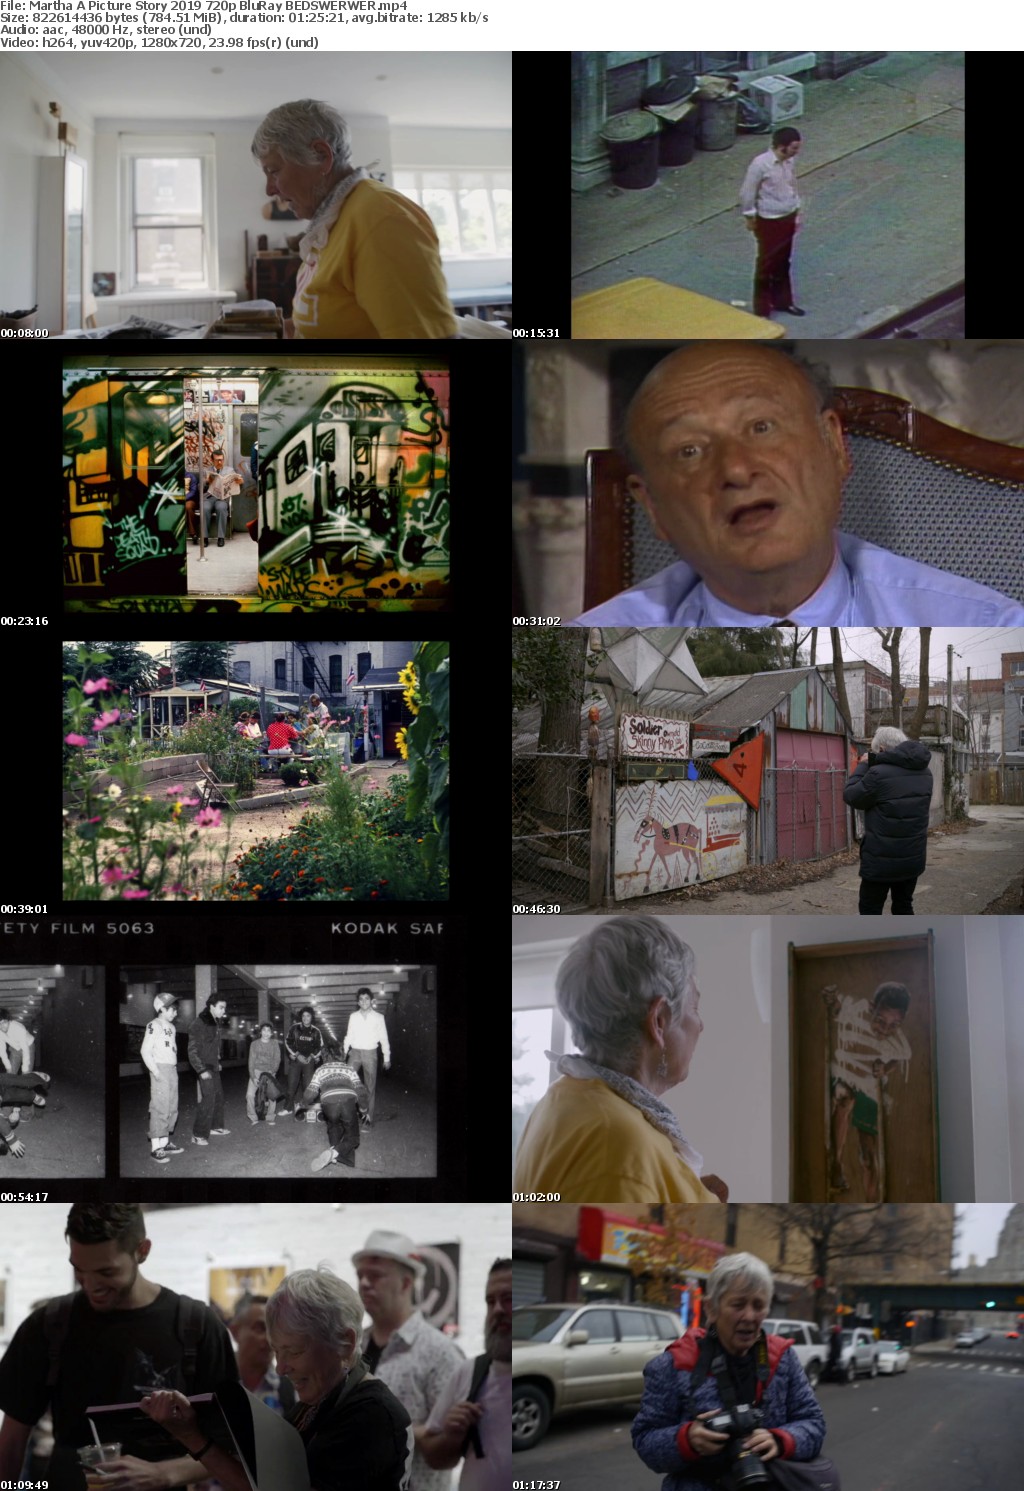 Martha A Picture Story 2019 720p BluRay BEDSWERWER